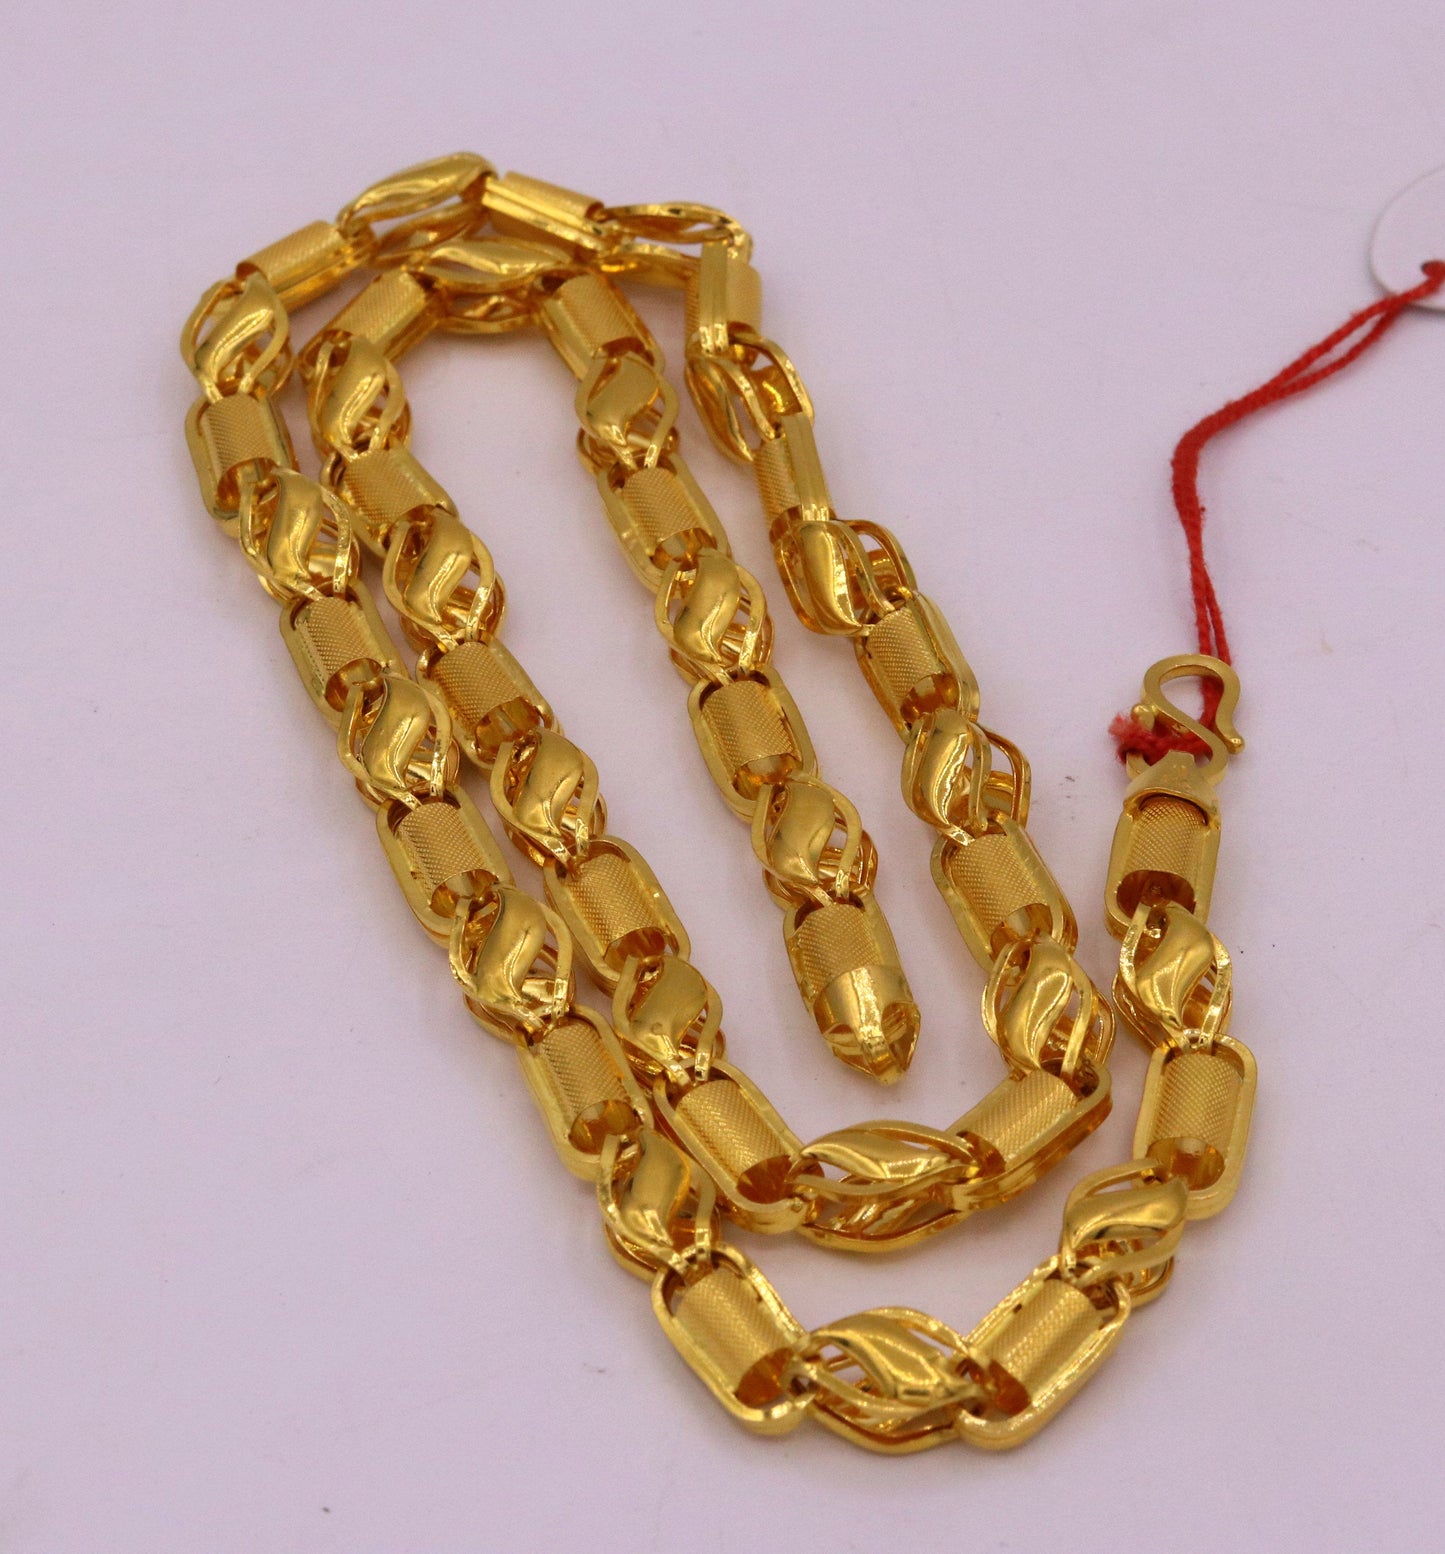 22kt yellow gold handmade amazing customized design excellent personalized gifting chain necklace from India ch211 - TRIBAL ORNAMENTS